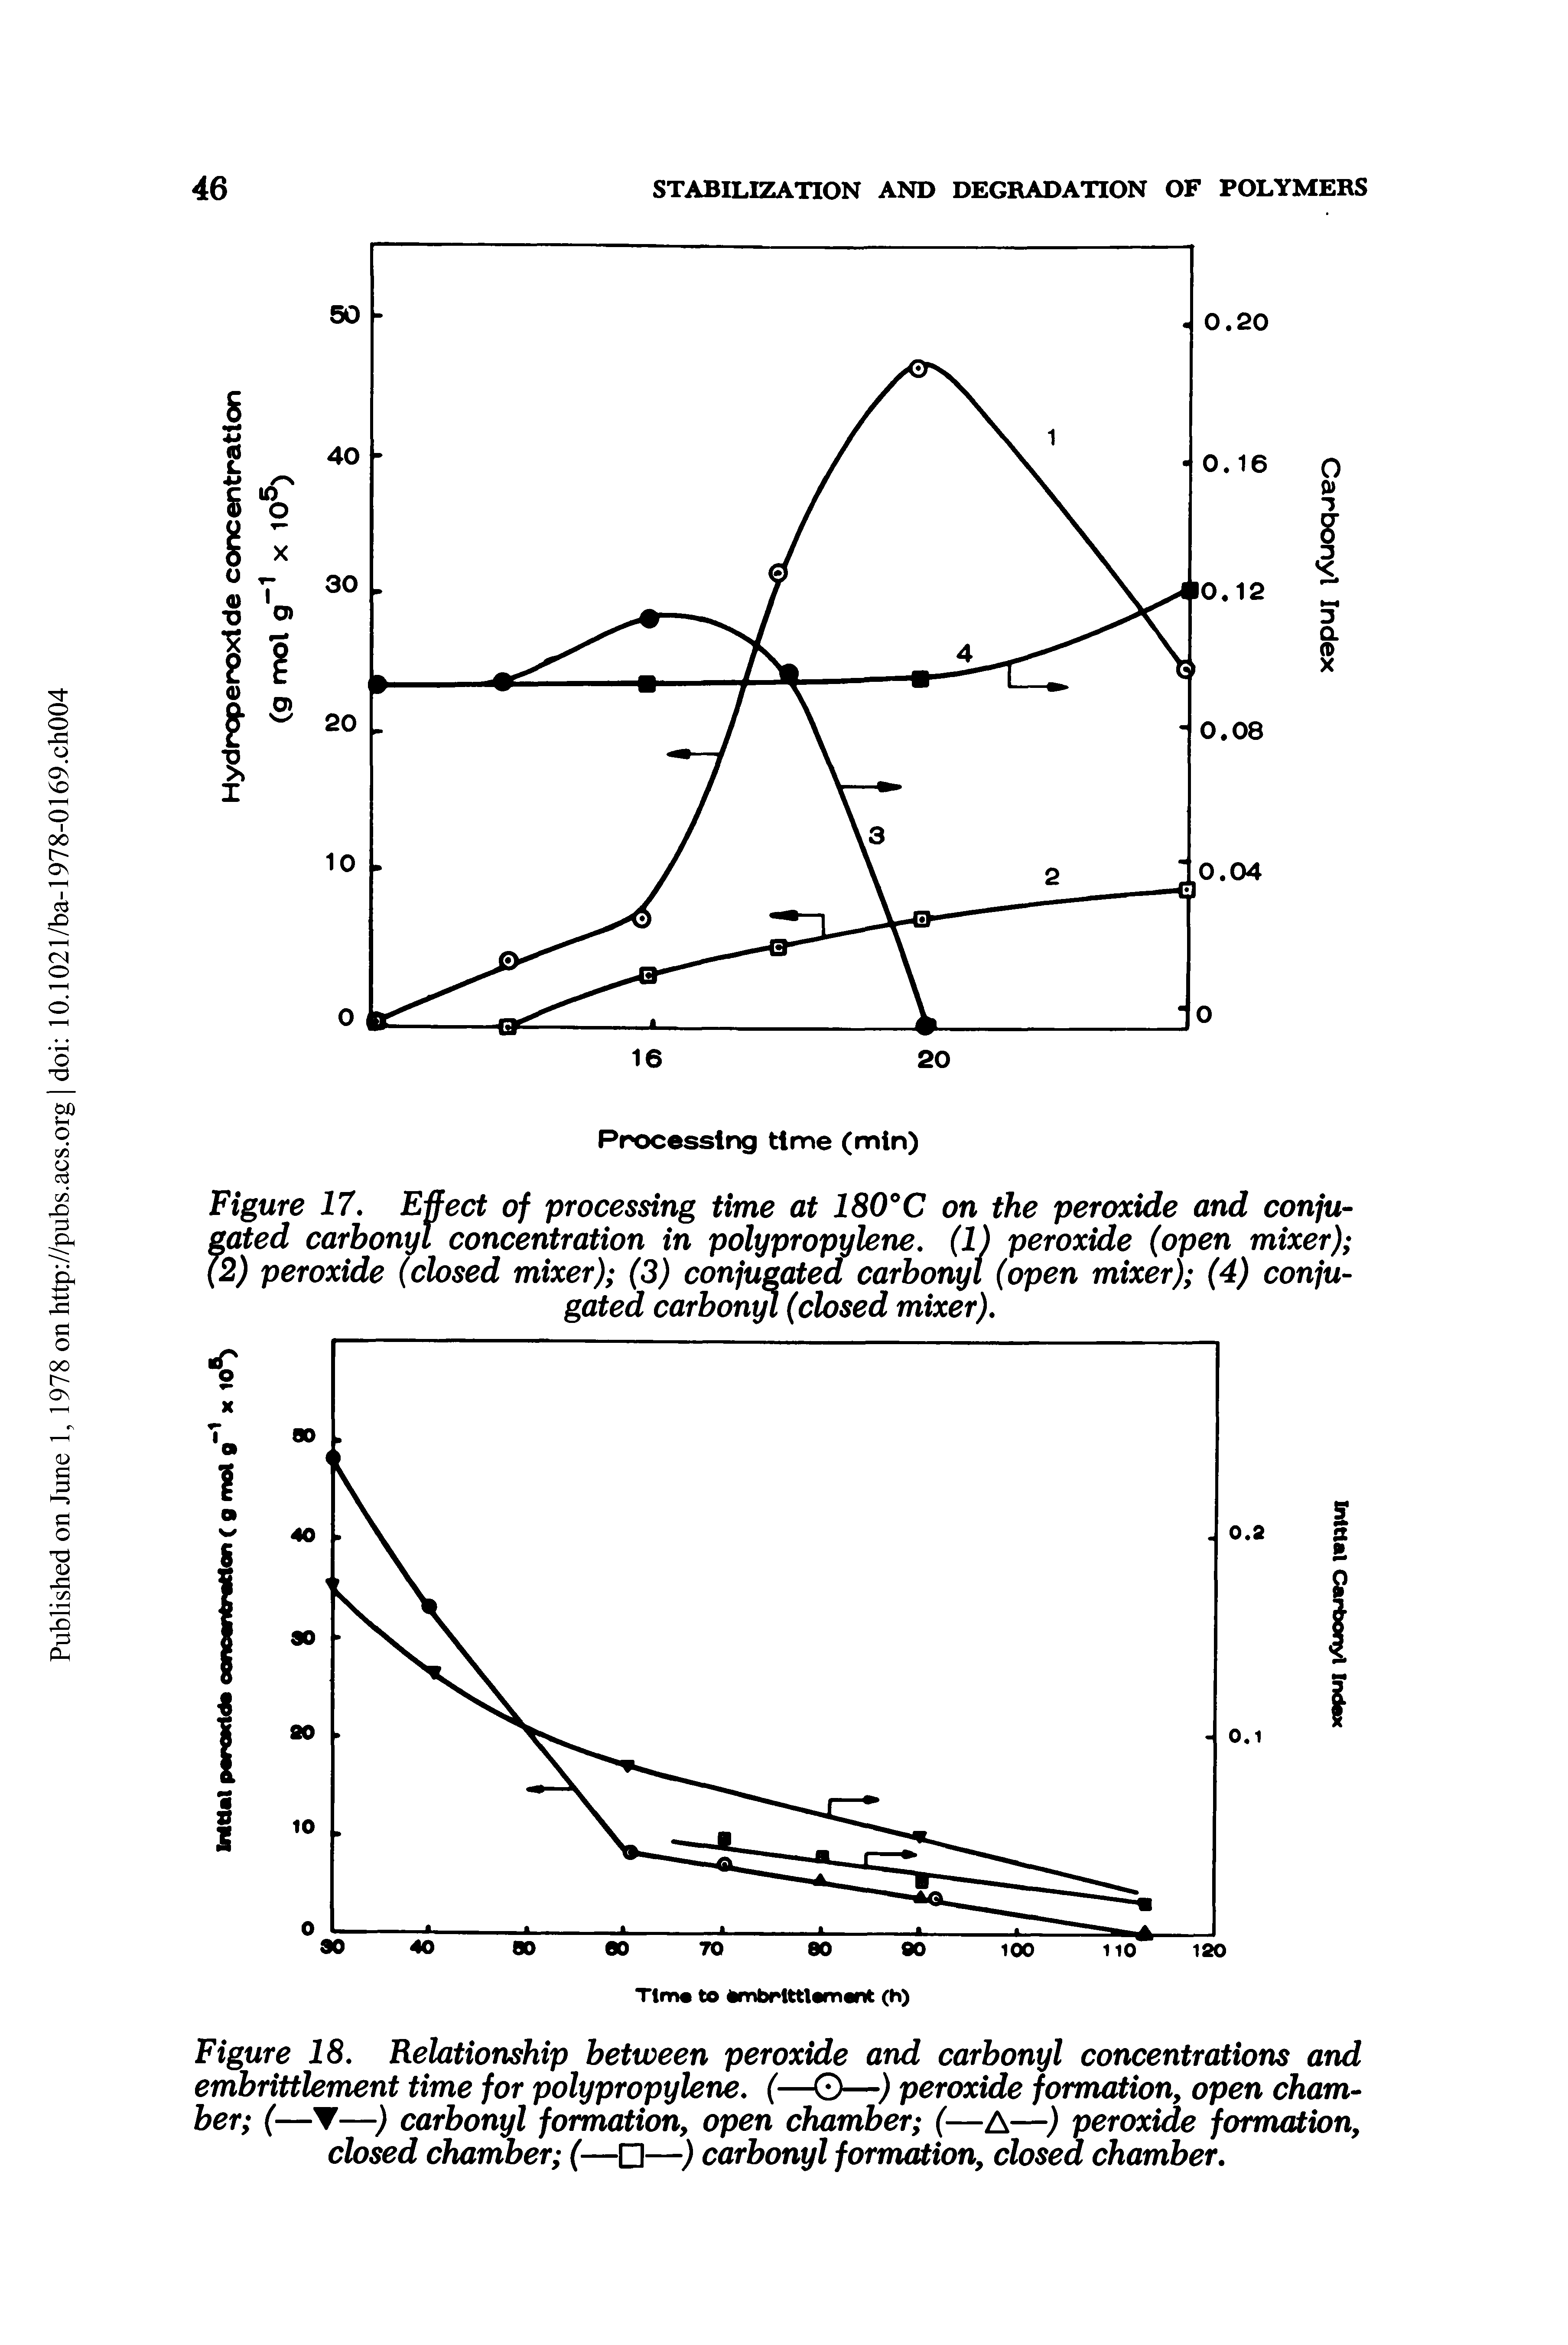 Figure 18. Relationship between peroxide and carbonyl concentrations and embrittlement time for polypropylene. (—CD—) peroxide formation, open chamber (— —) carbonyl formation, open chamber (—A—) peroxide formation, closed chamber (— —) carbonyl formation, closed chamber.